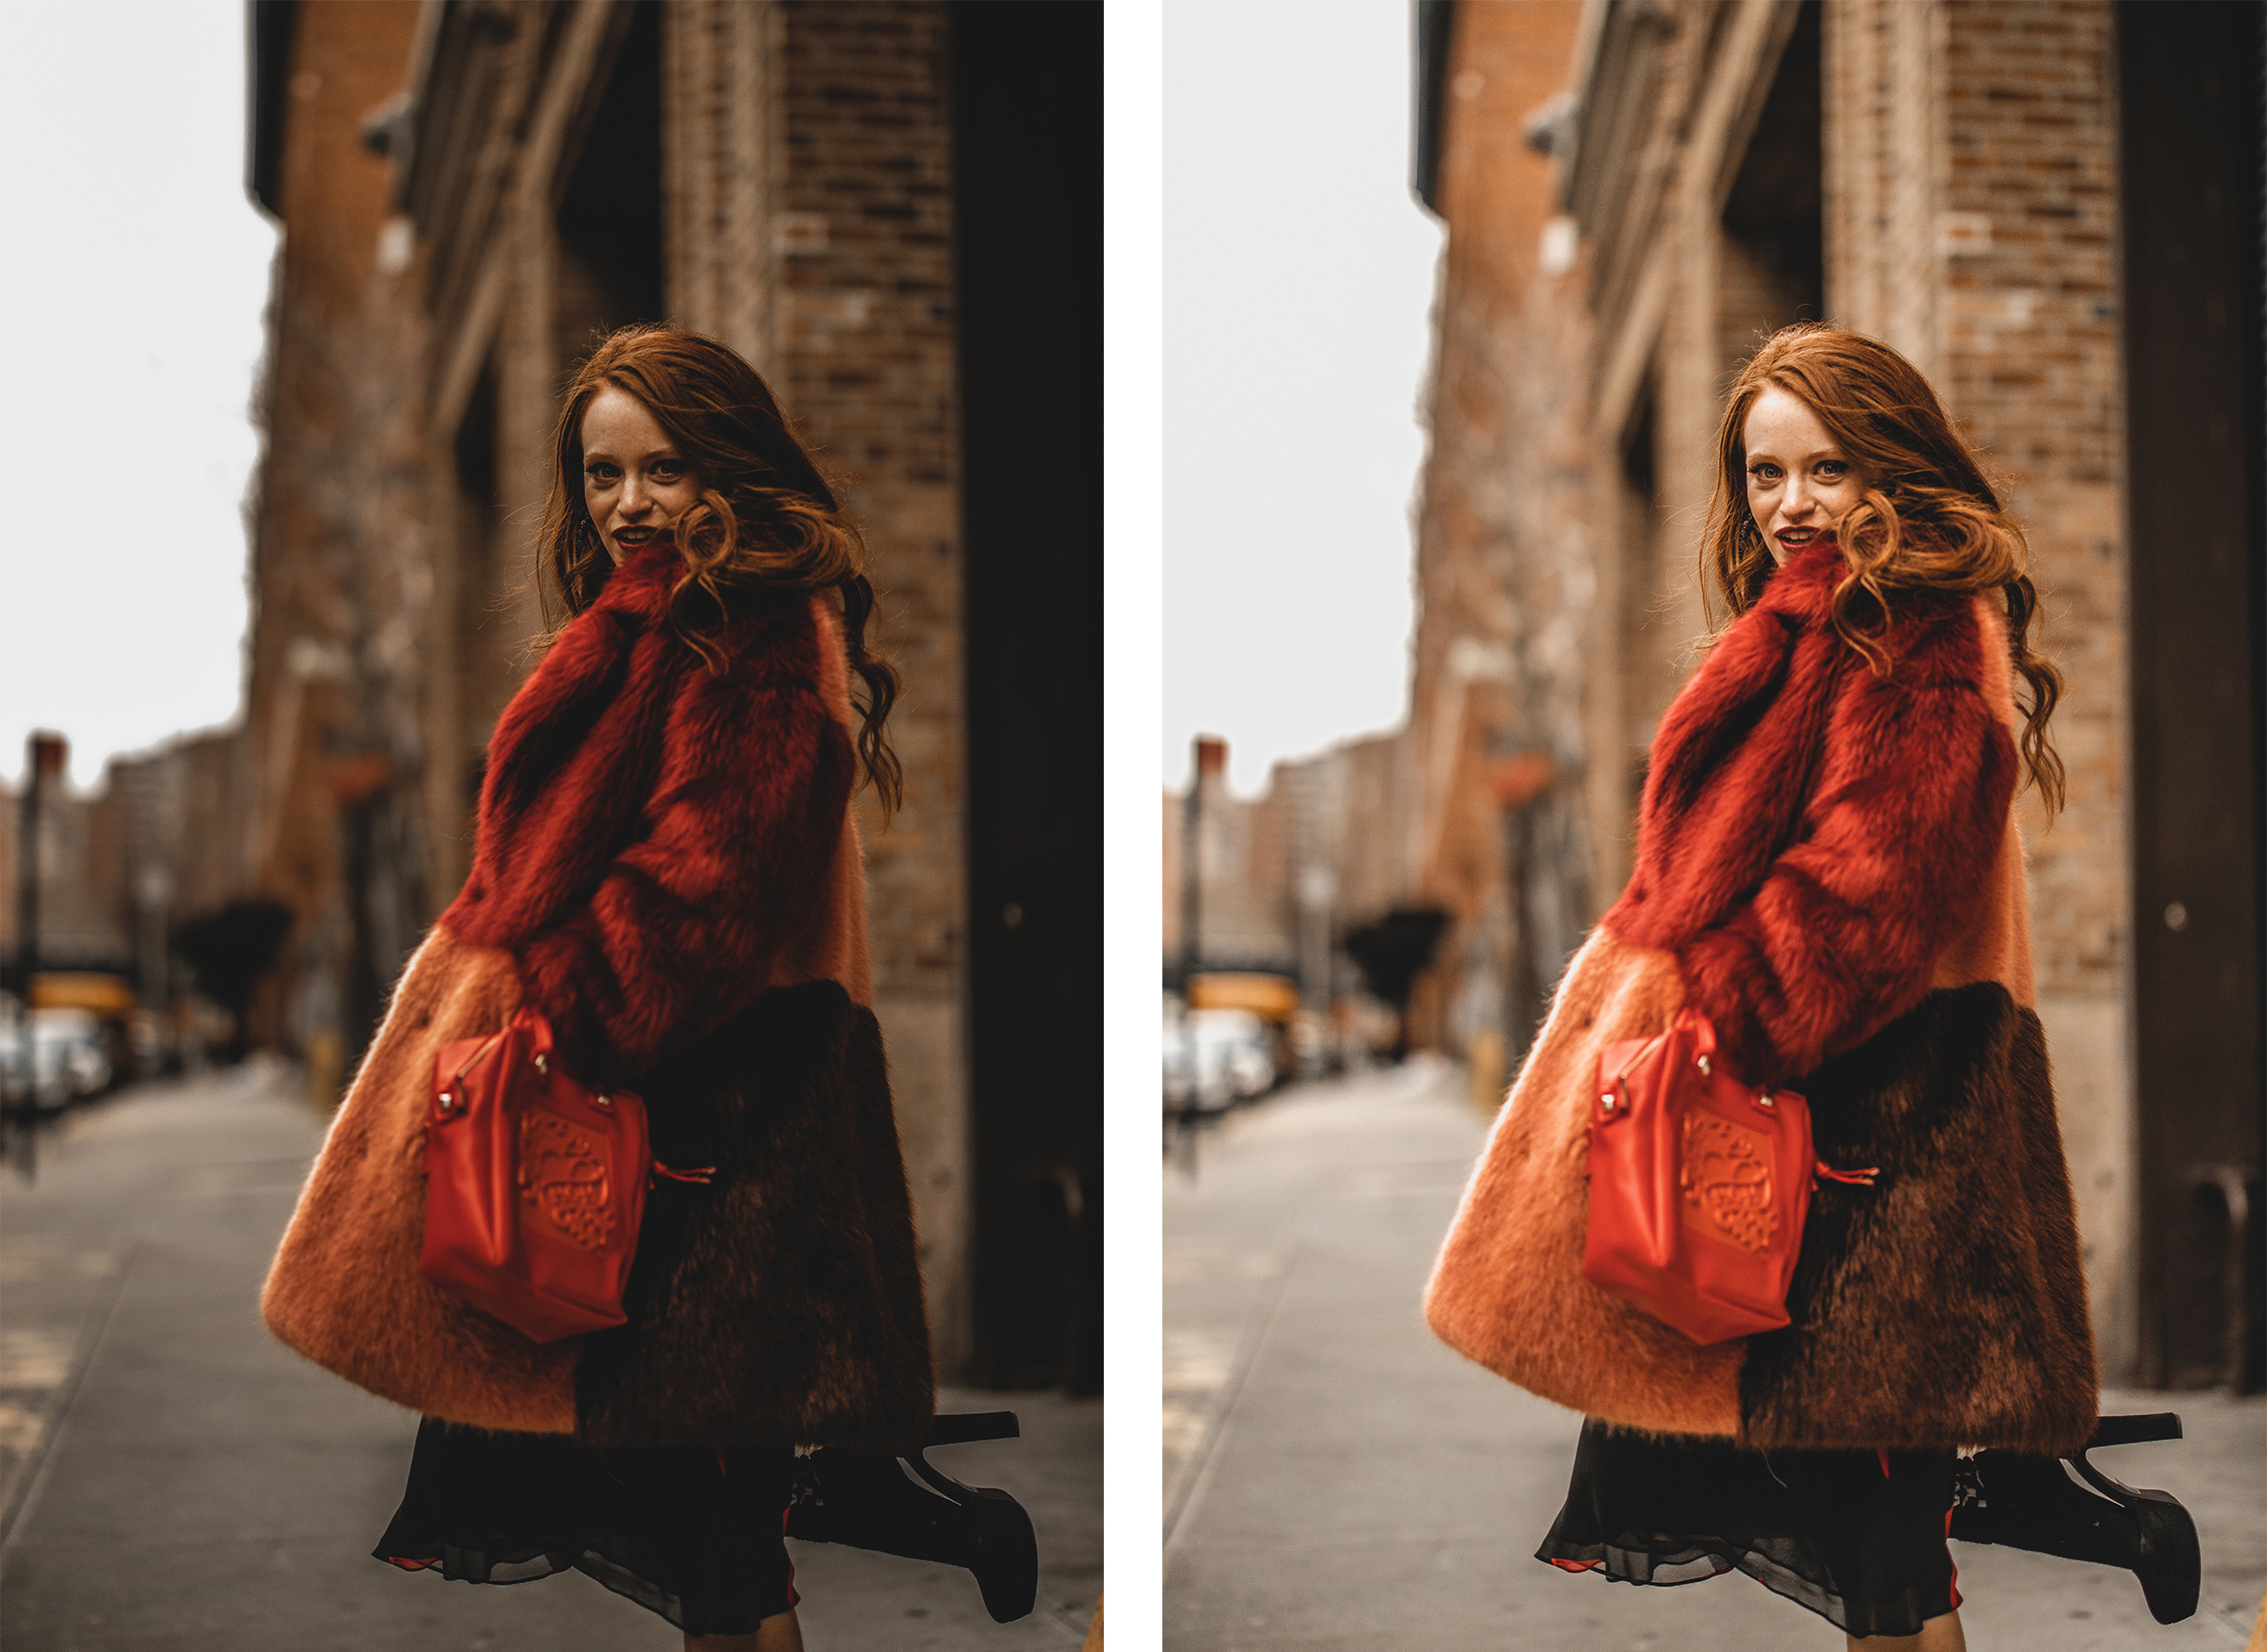 side by side light and shadow comparison of red-haired model in bright red fur coat turning to look at the camera with one heel in the air